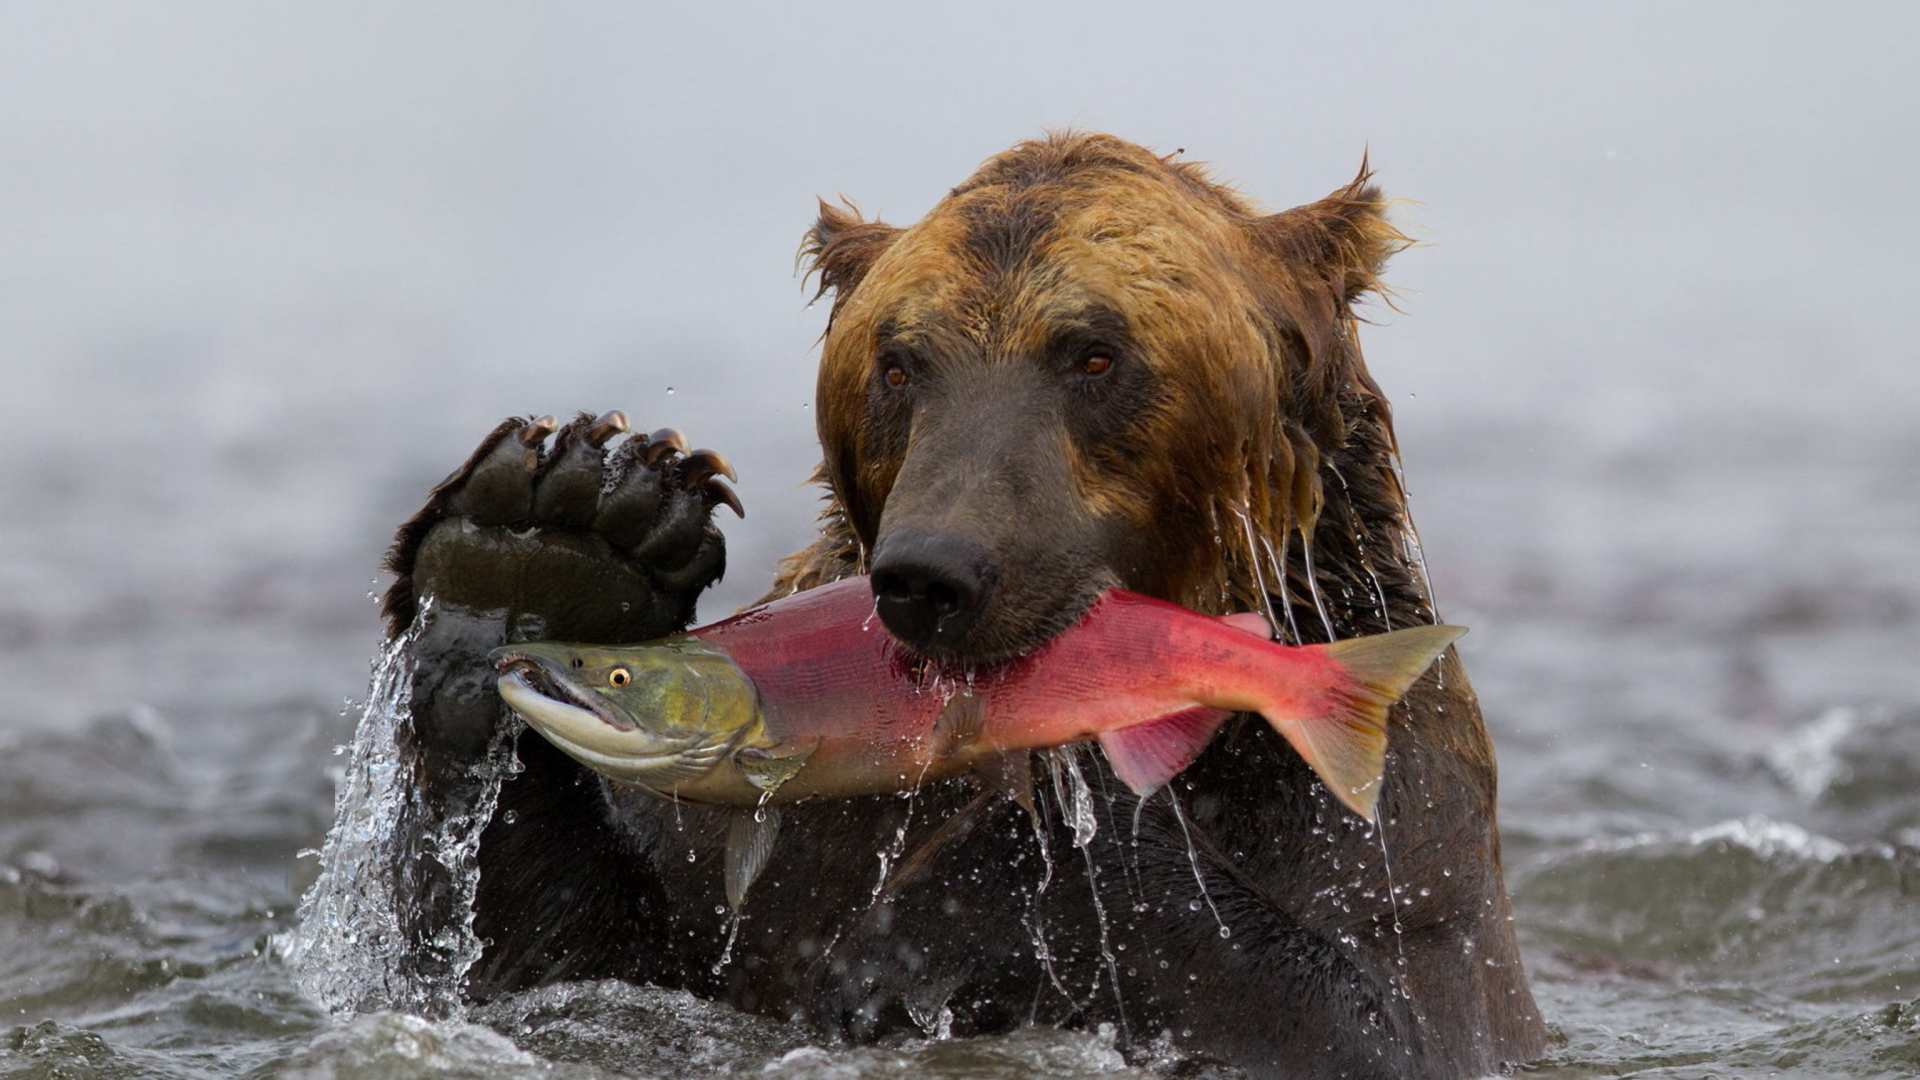 Grizzly Bear Catching Fish Wallpaper for 1920x1080